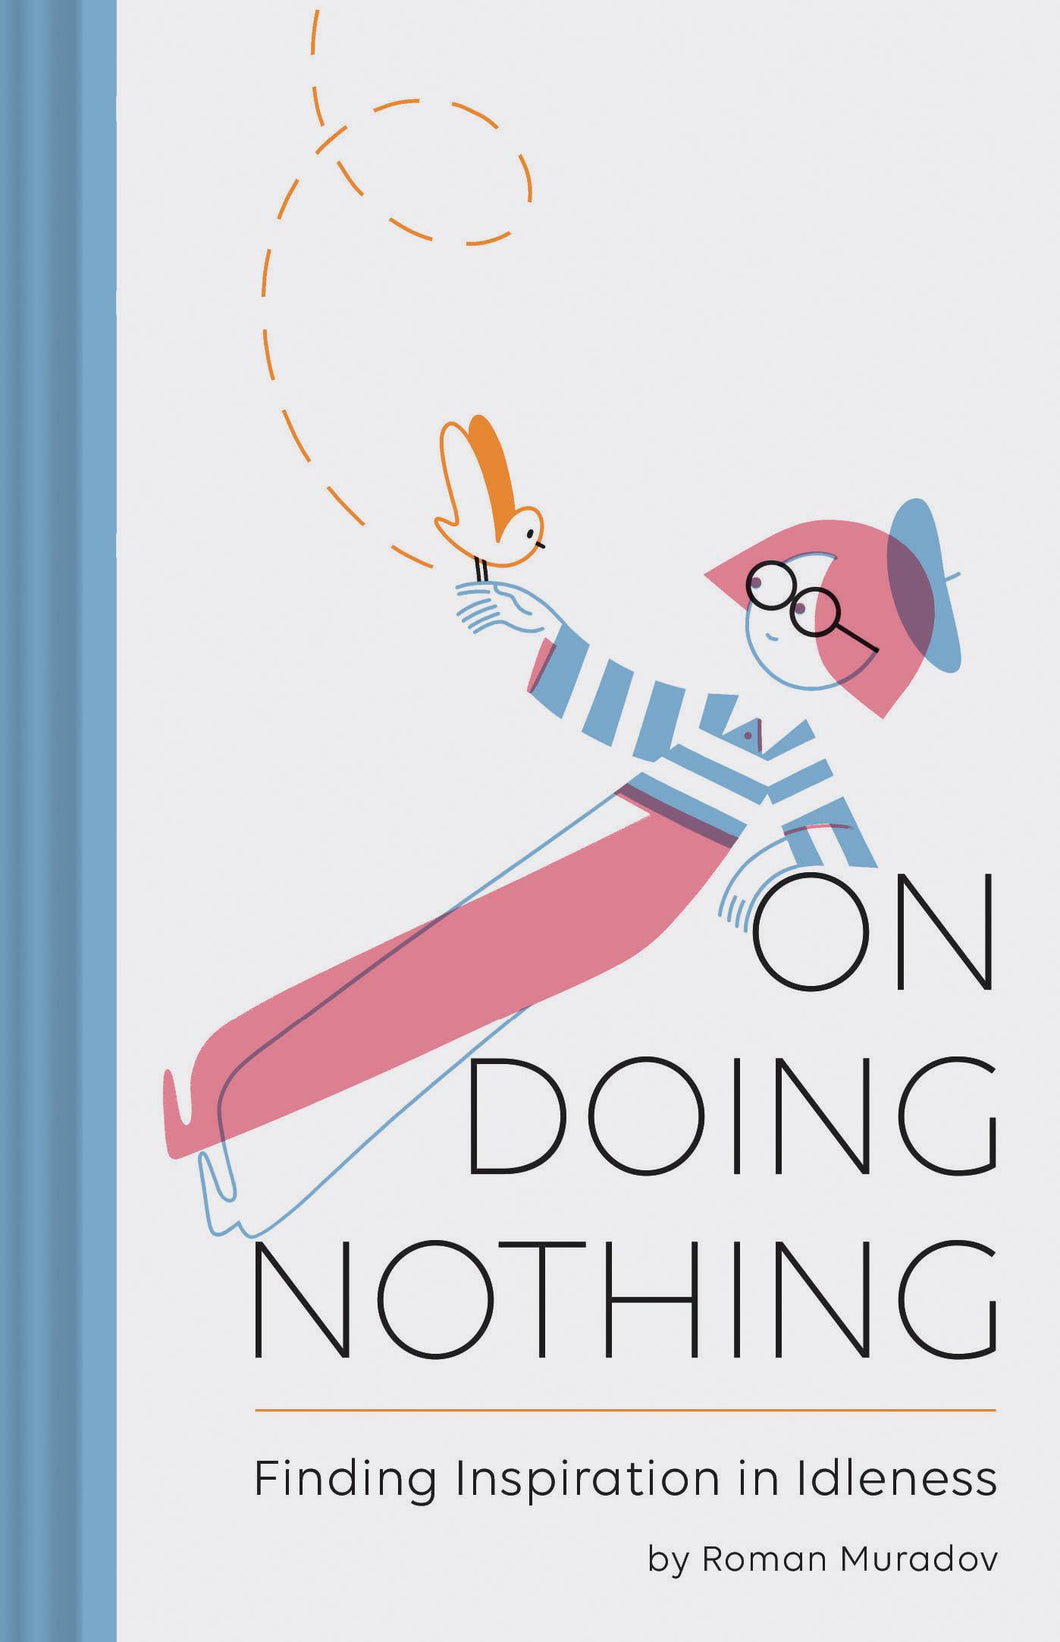 On Doing Nothing by Roman Muradov